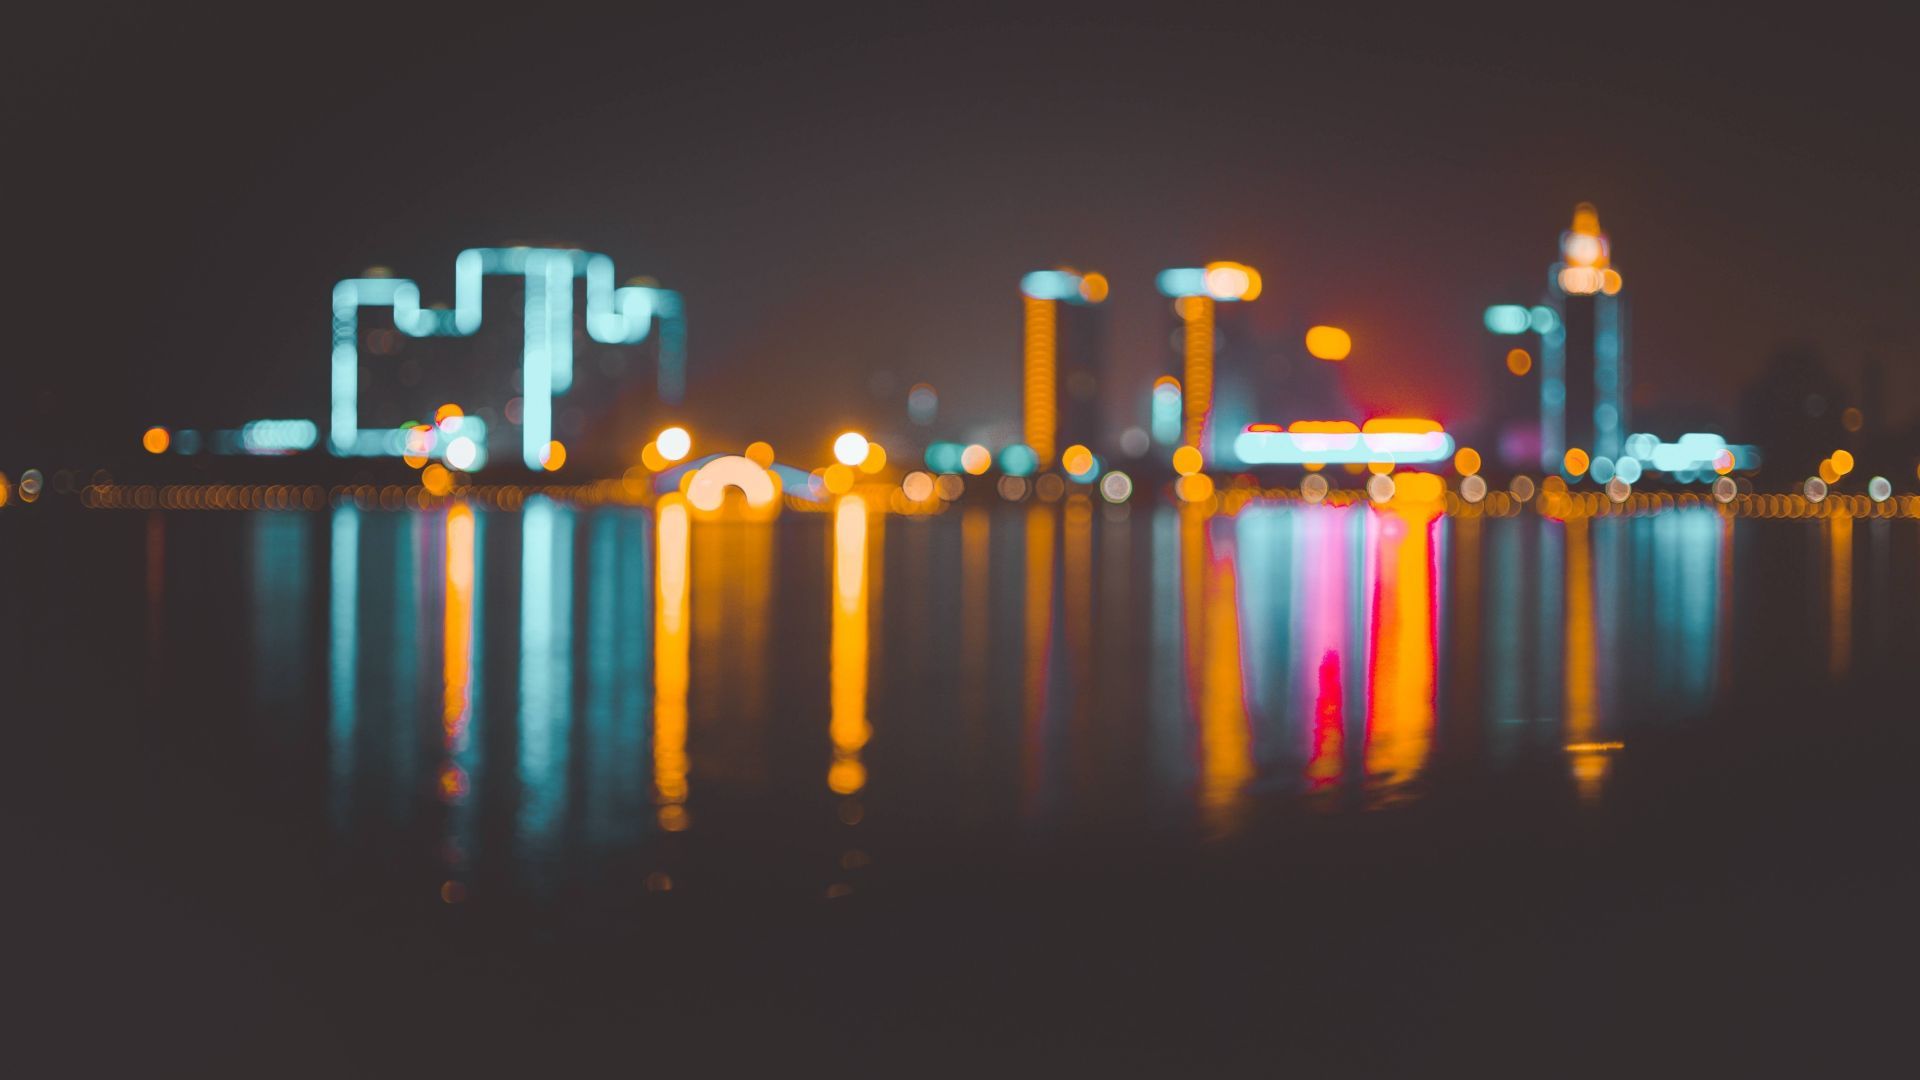 Desktop wallpapers city, lights, blur, reflections, hd image, picture, background, b3999c